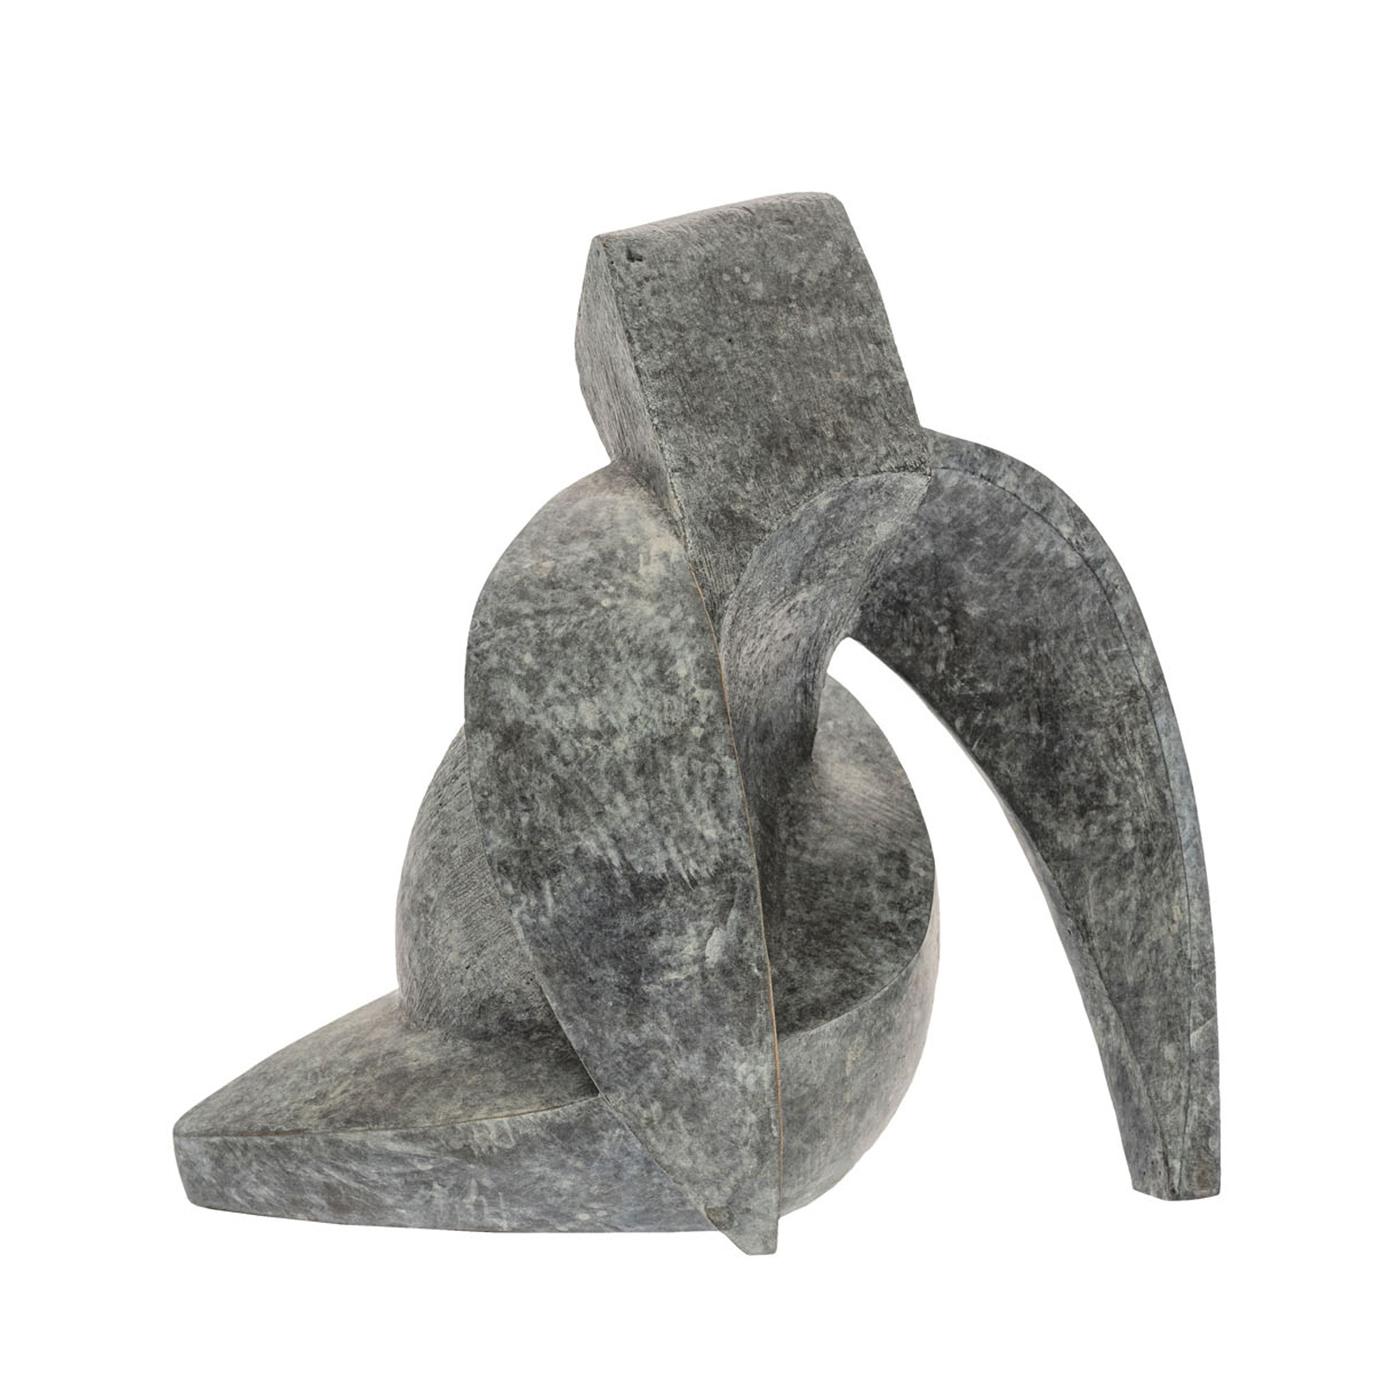 Sculpture Breather Grey Bronze all
in solid bronze in grey finish.